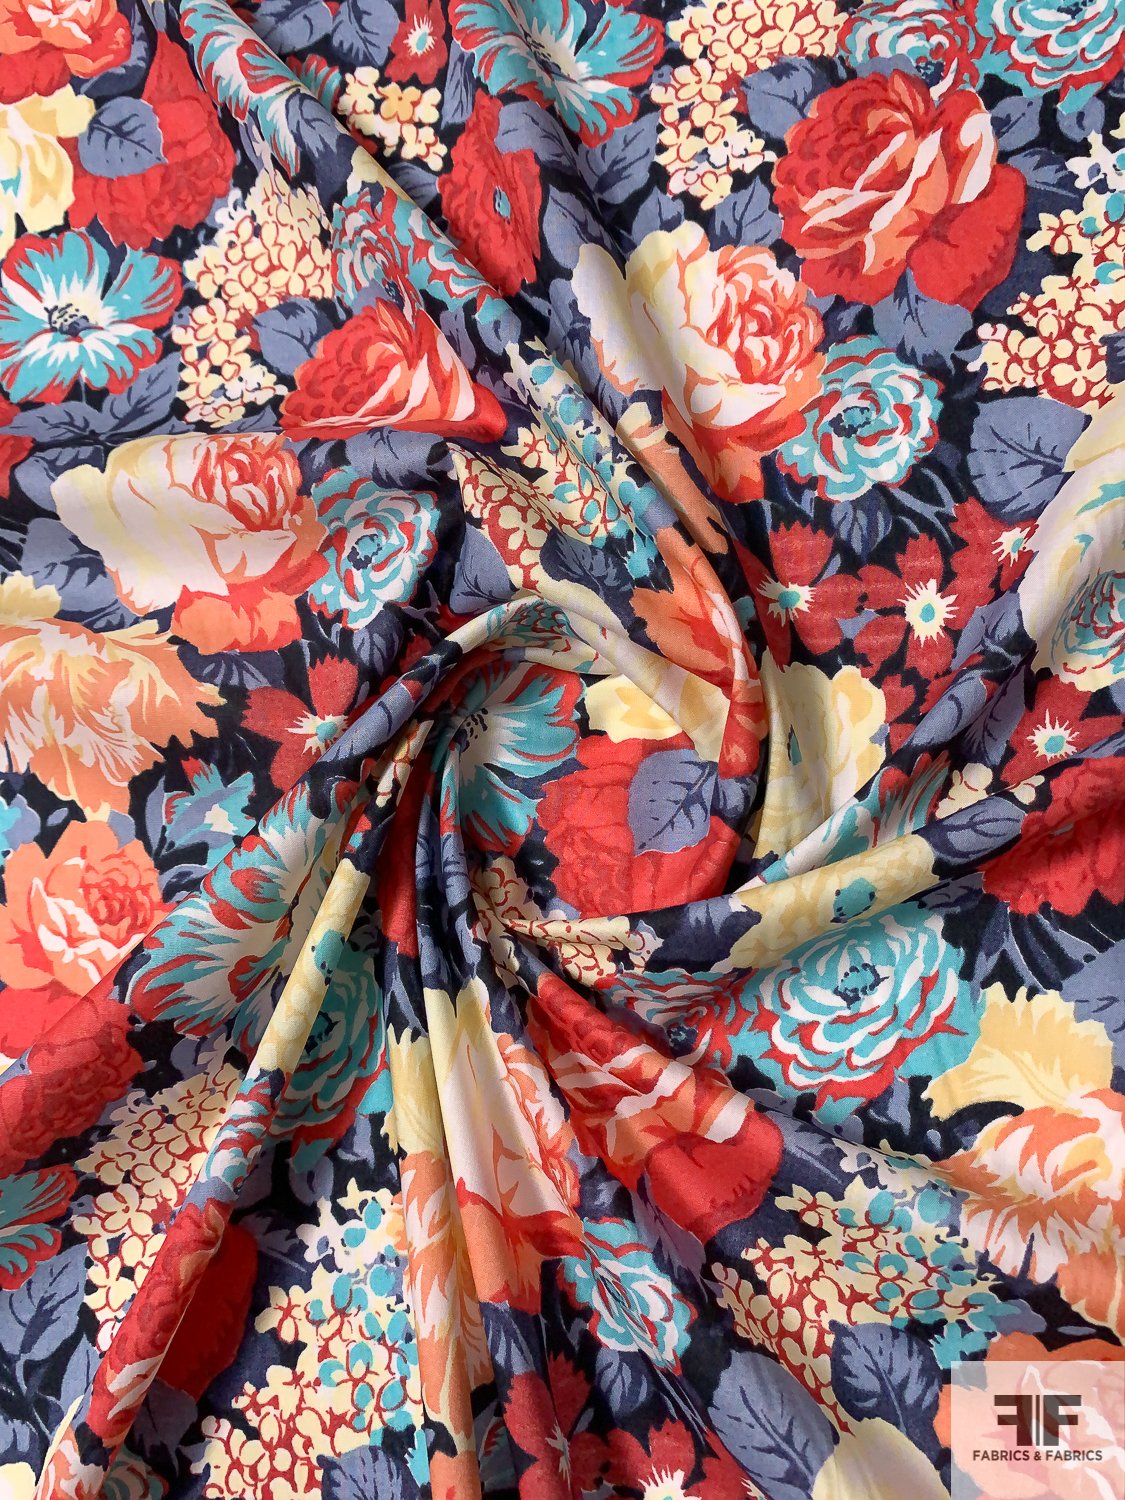 New Floral Cotton Lawn Prints! - Fabric Outlet SF